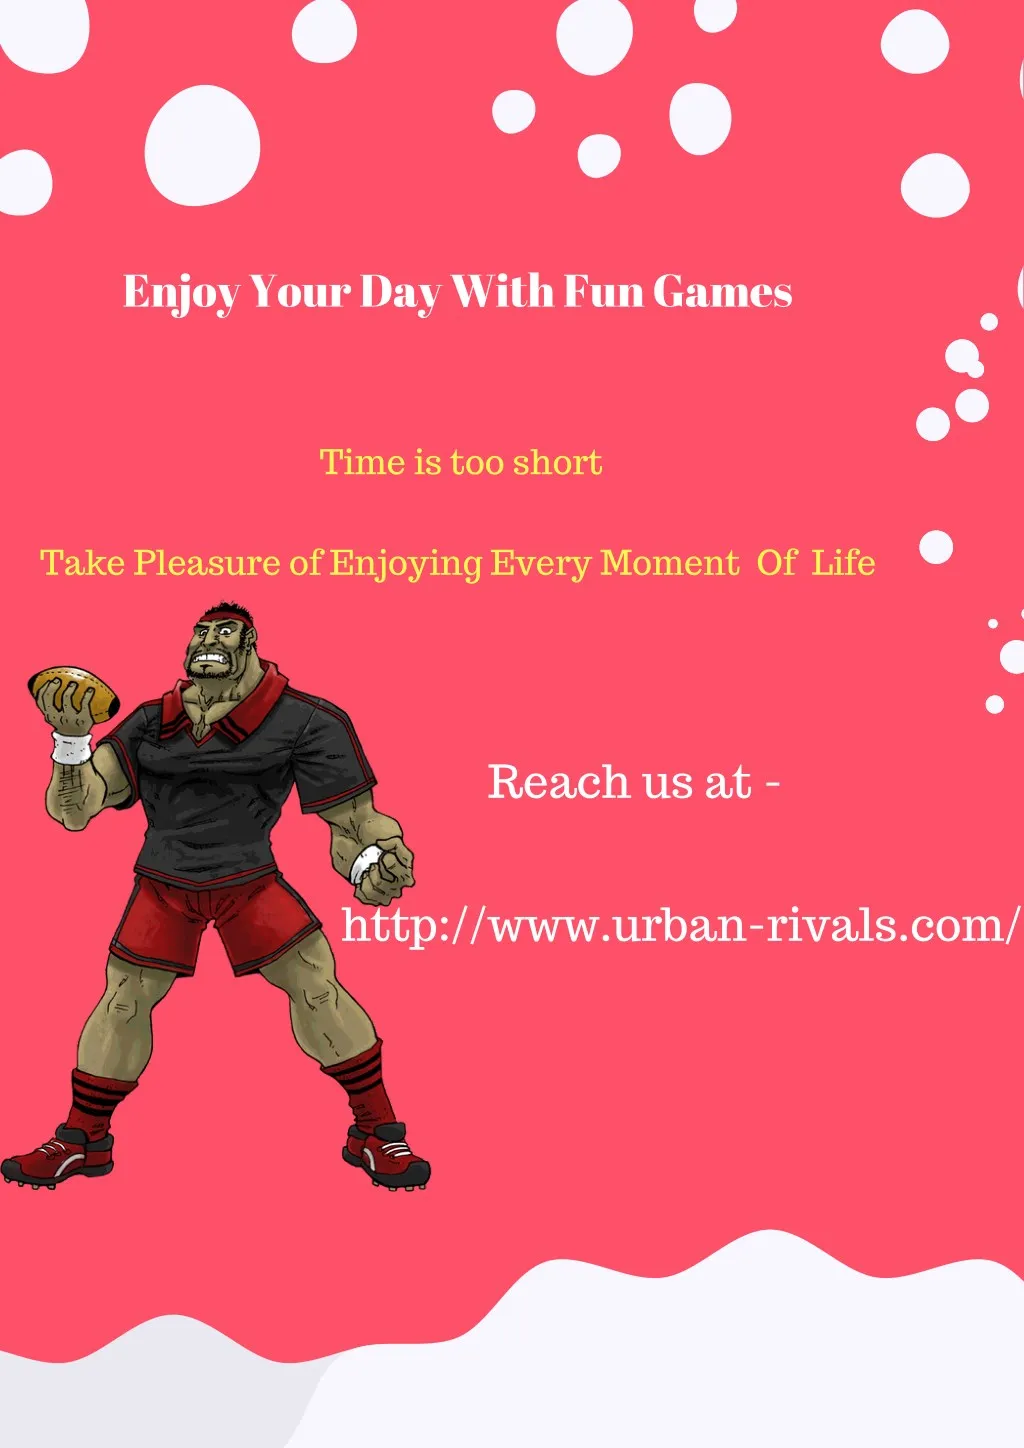 enjoy your day with fun games